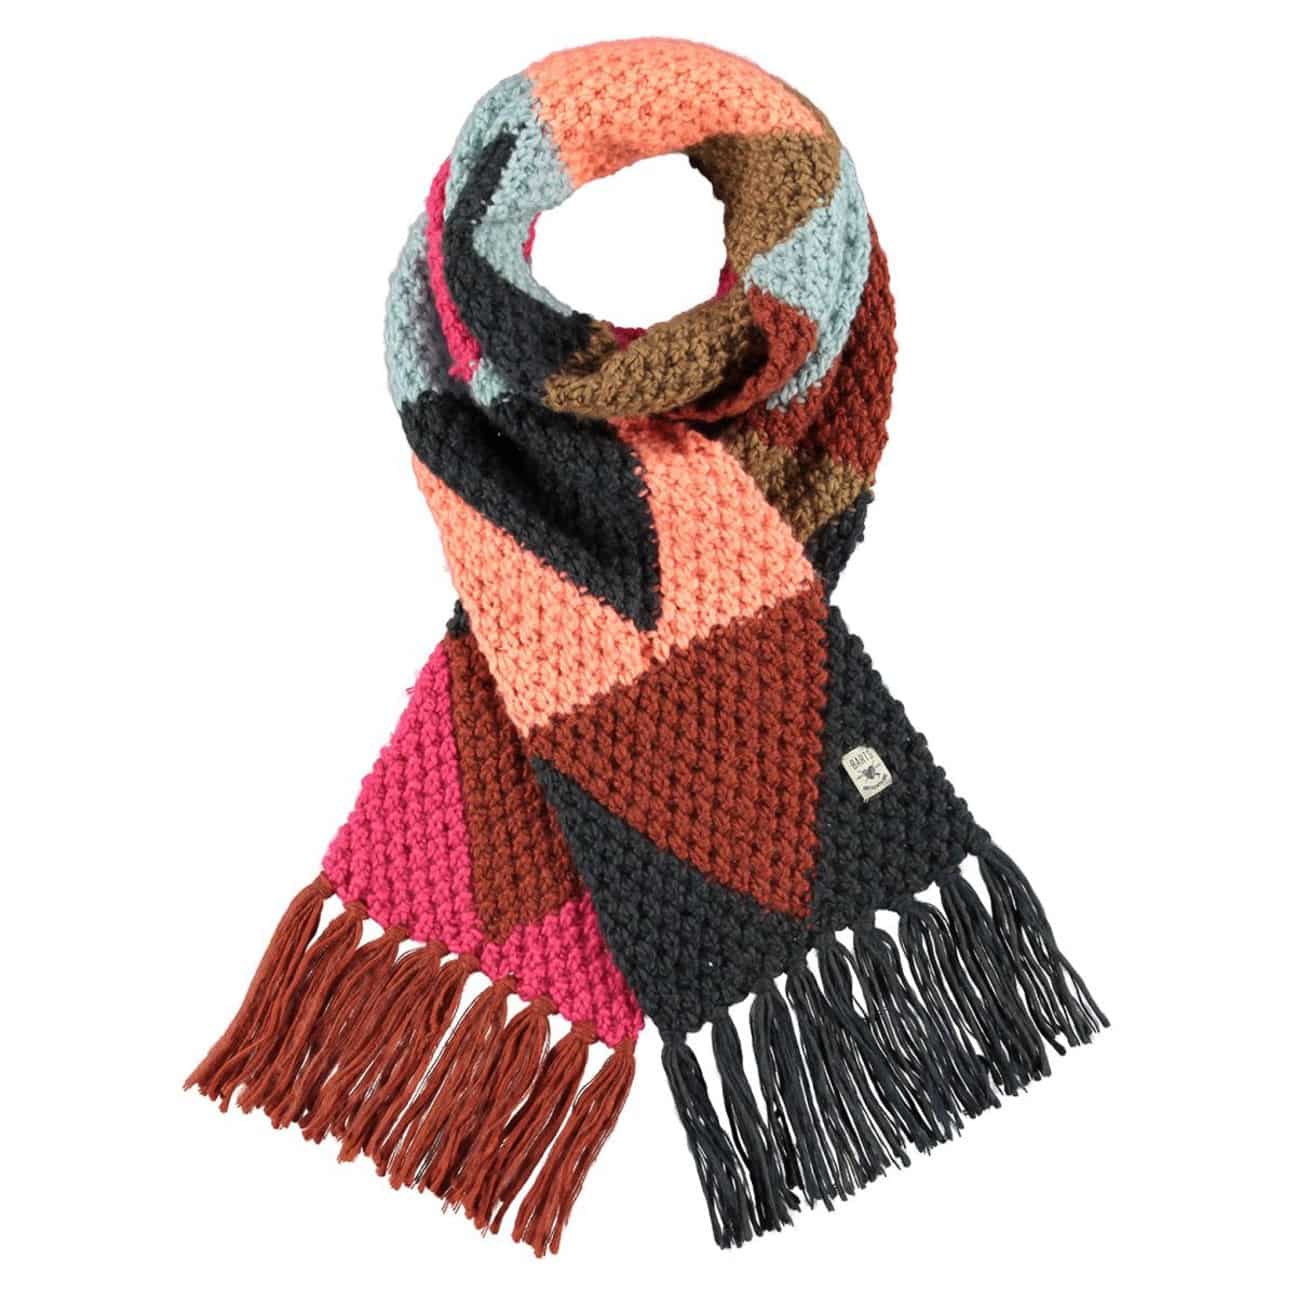 Sonic Women´s Fringed Scarf by Barts - 44,95